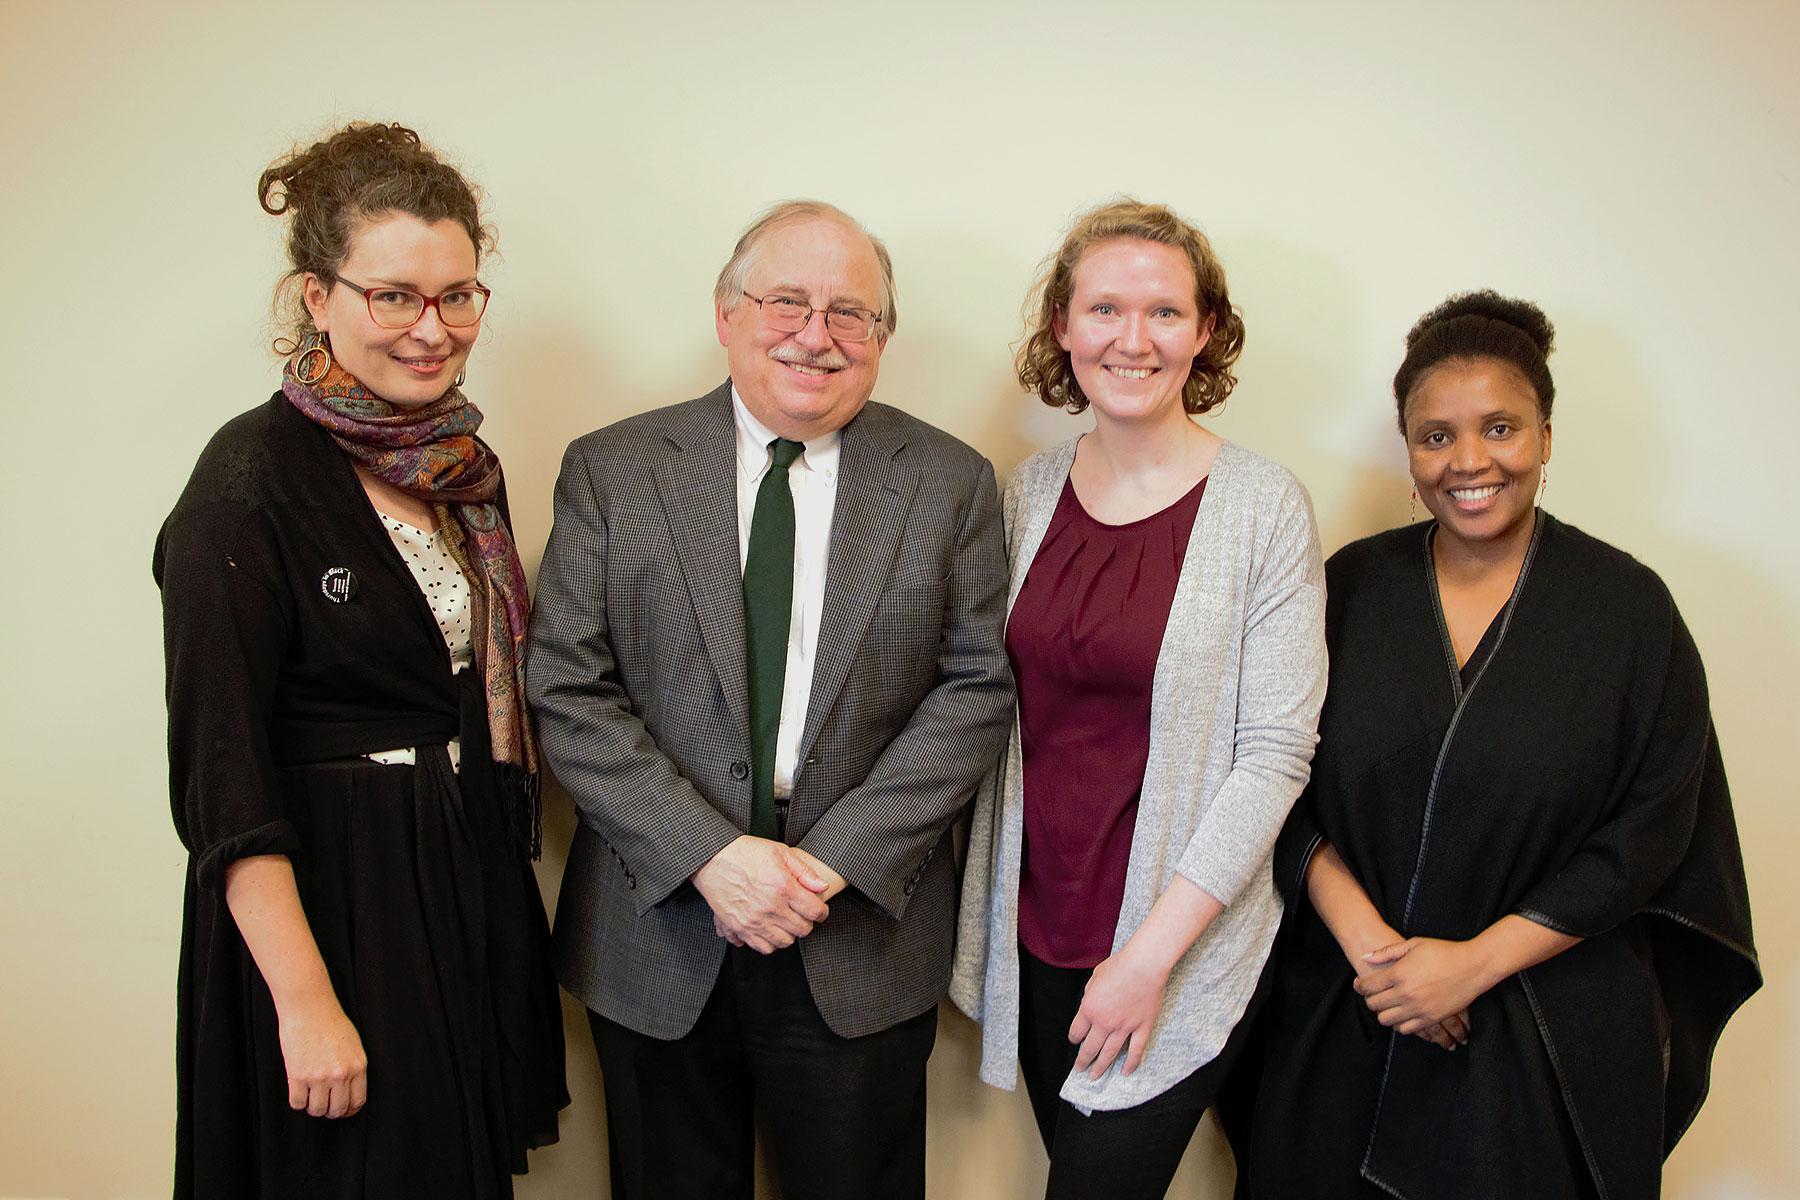 Visiting the Lutheran office in New York, Helena Funk (third from left) received valuable tips on climate advocacy from Rebekka Pohlmann, Germany; Dennis Frado, LWFâs representative at the UN headquarters; and Christine Mangale, LOWC program director. Photo: Doug Hostetter